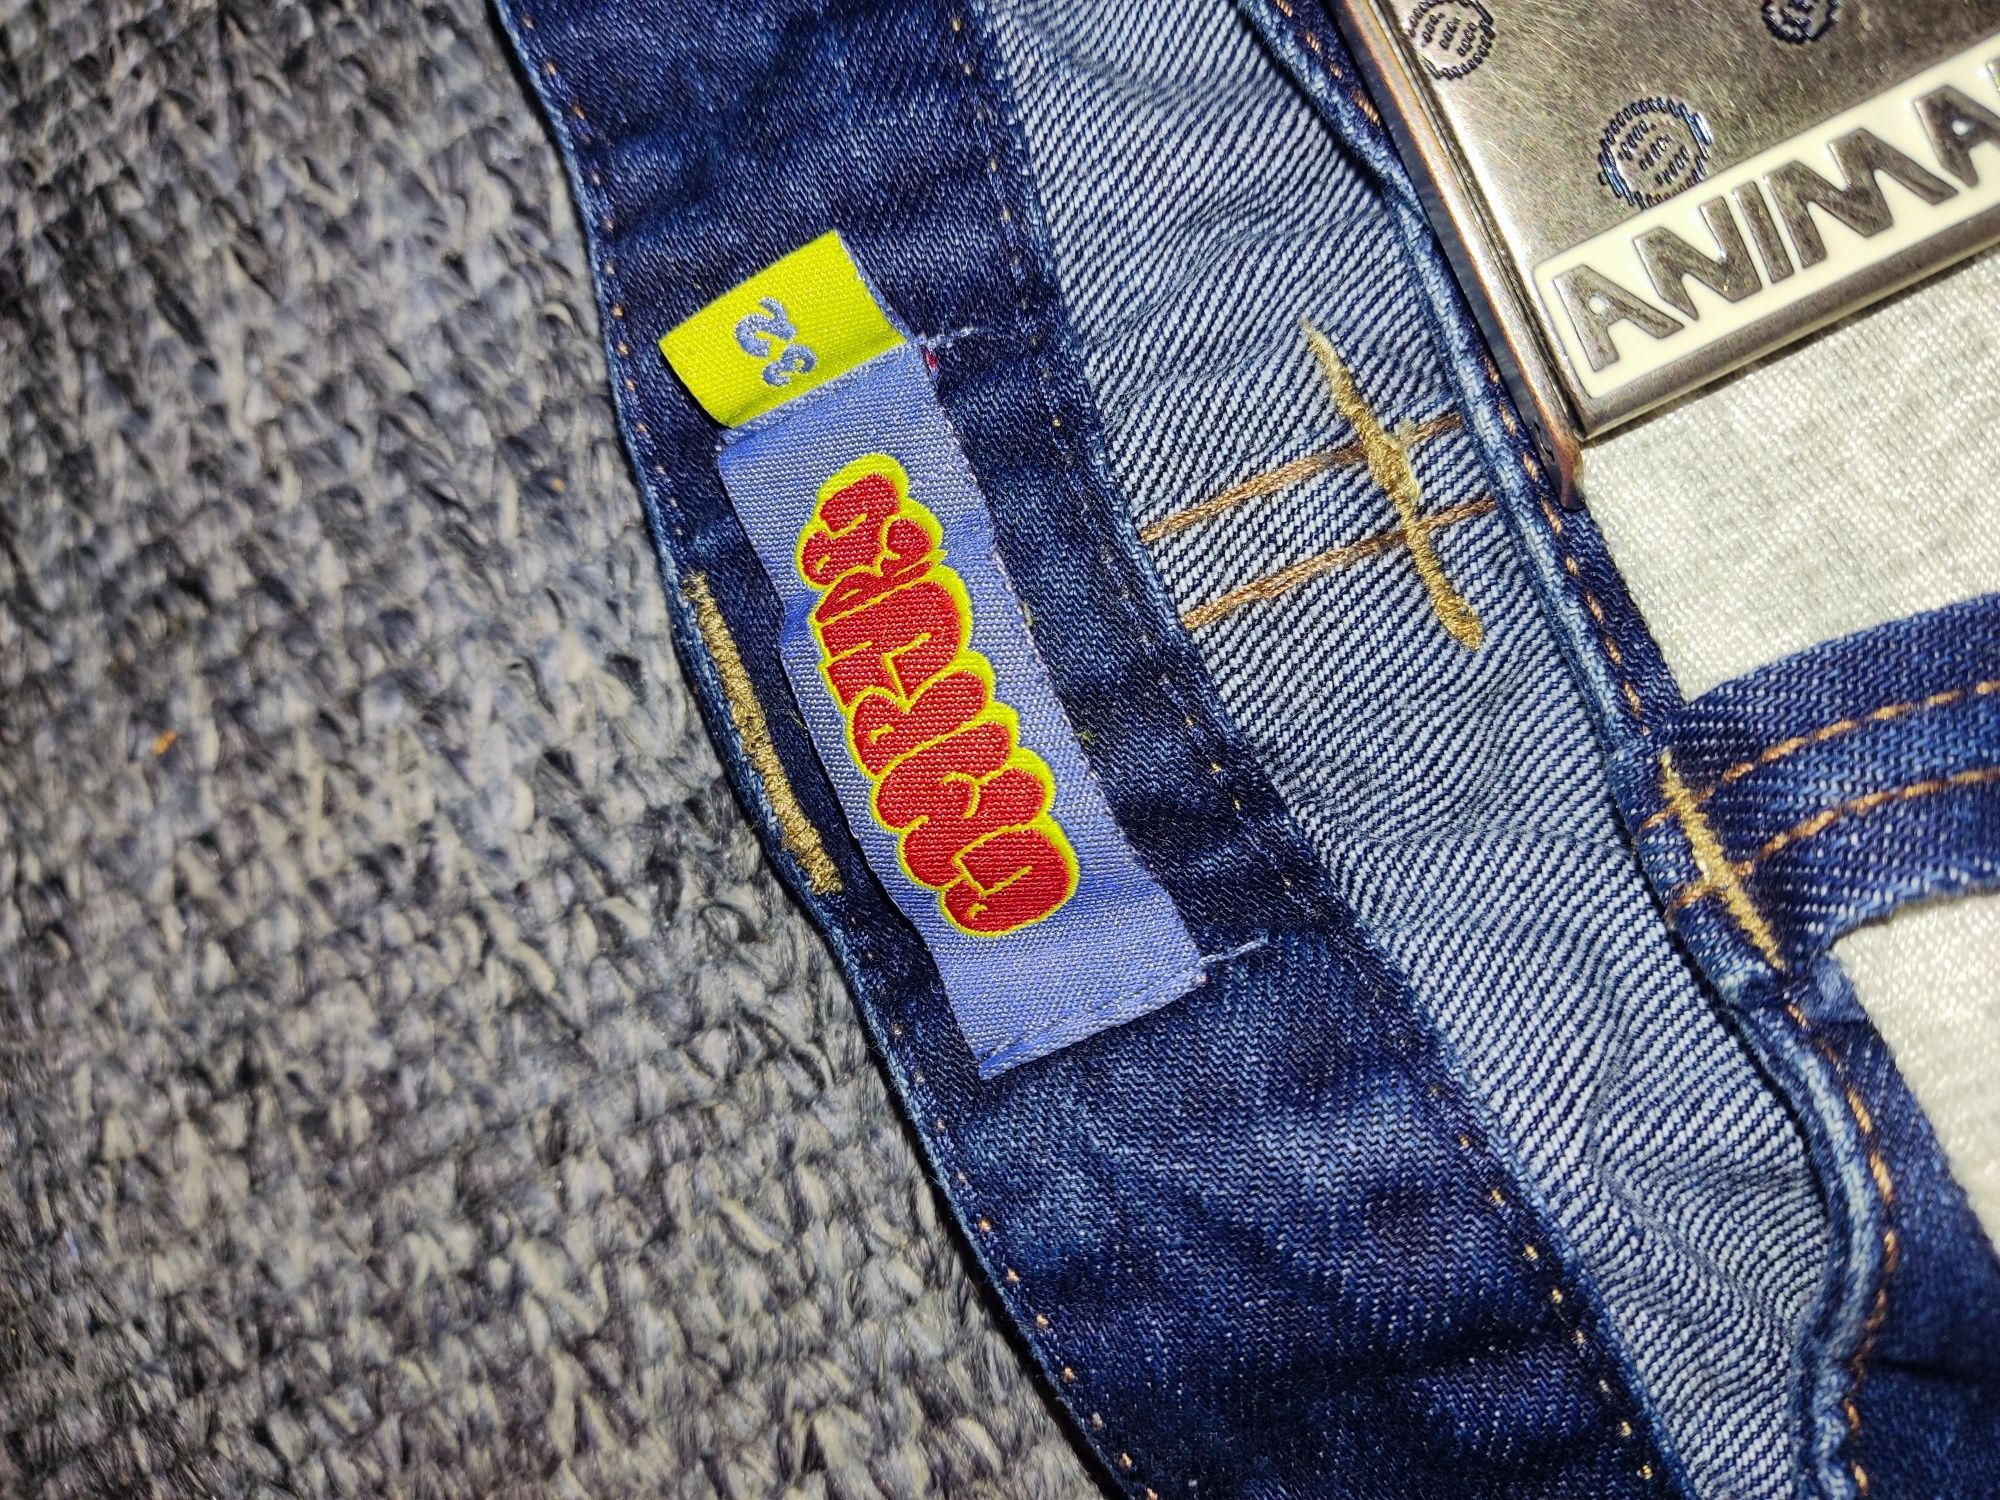 Empyre baggy jeans